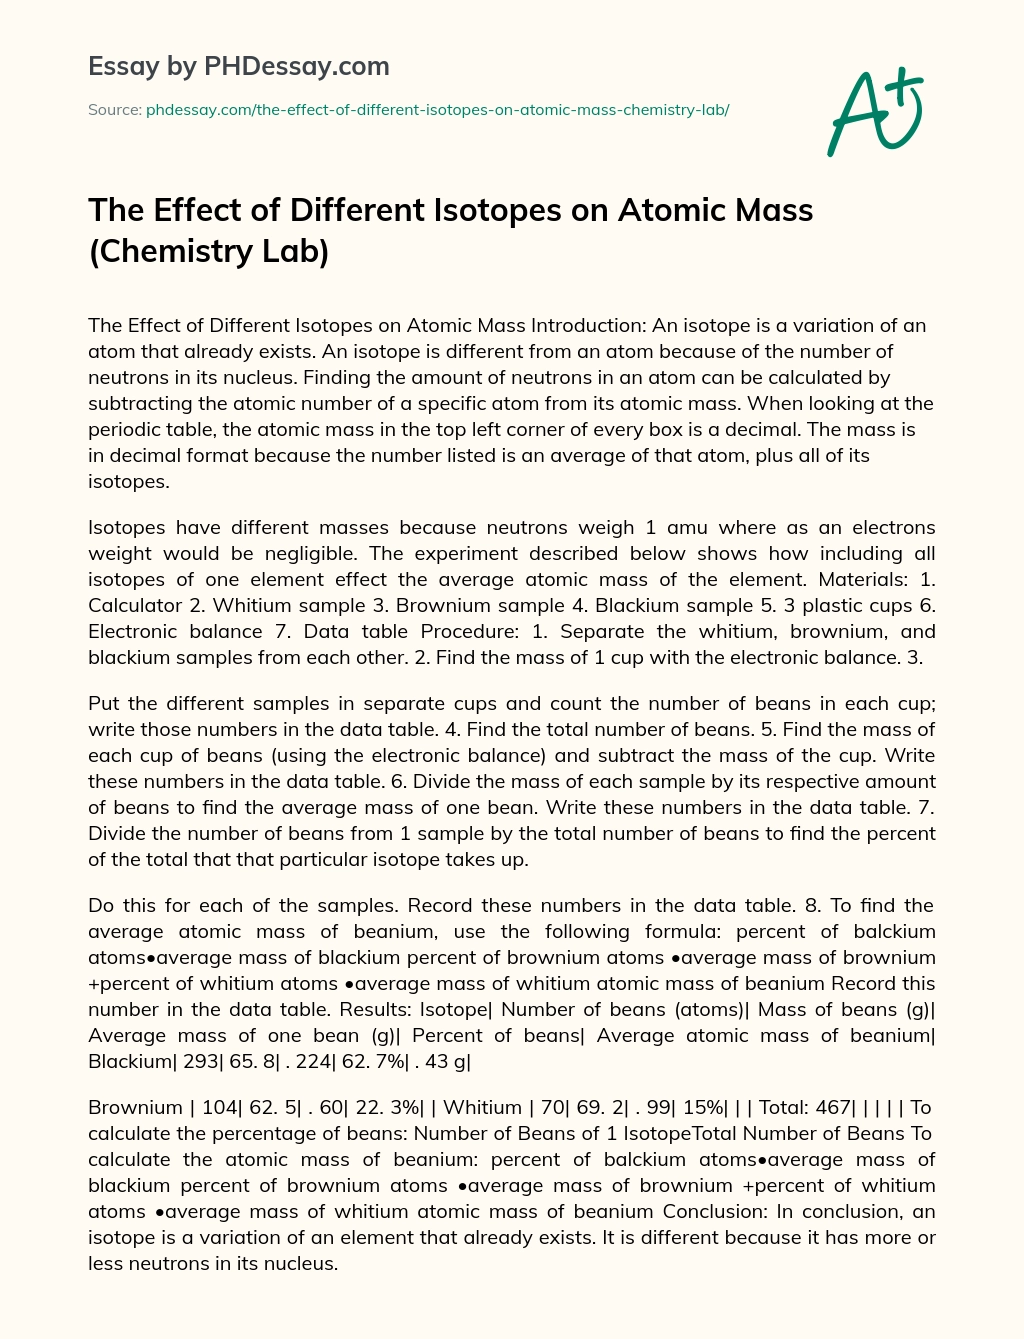 The Effect of Different Isotopes on Atomic Mass (Chemistry Lab) essay